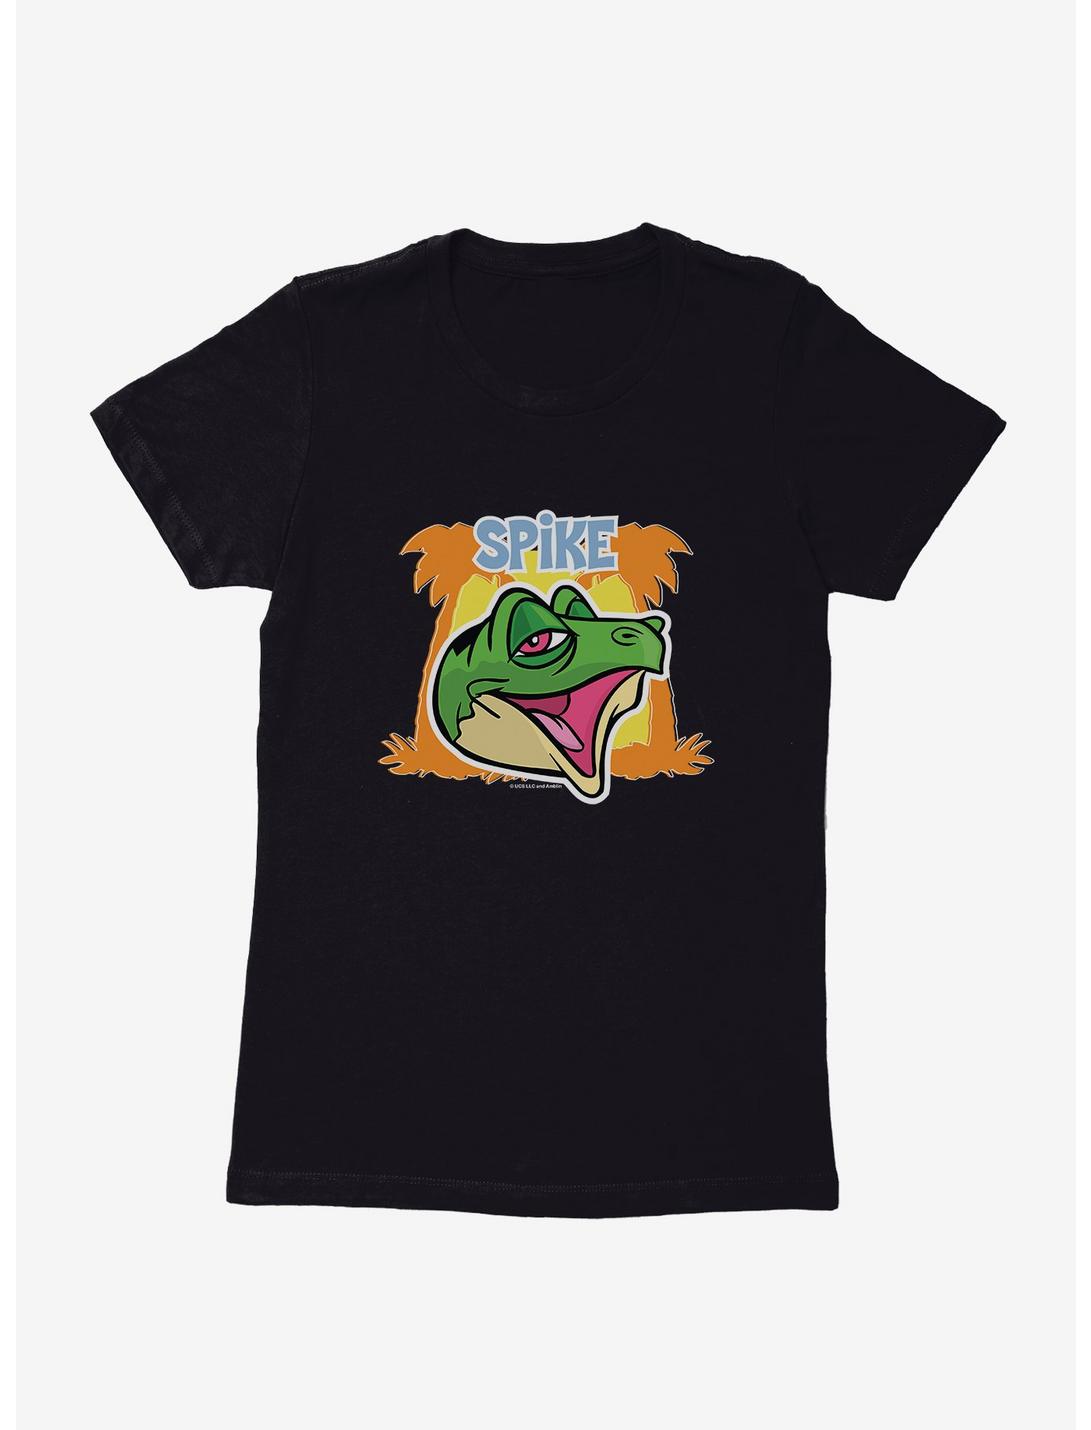 The Land Before Time Spike Womens T-Shirt, BLACK, hi-res